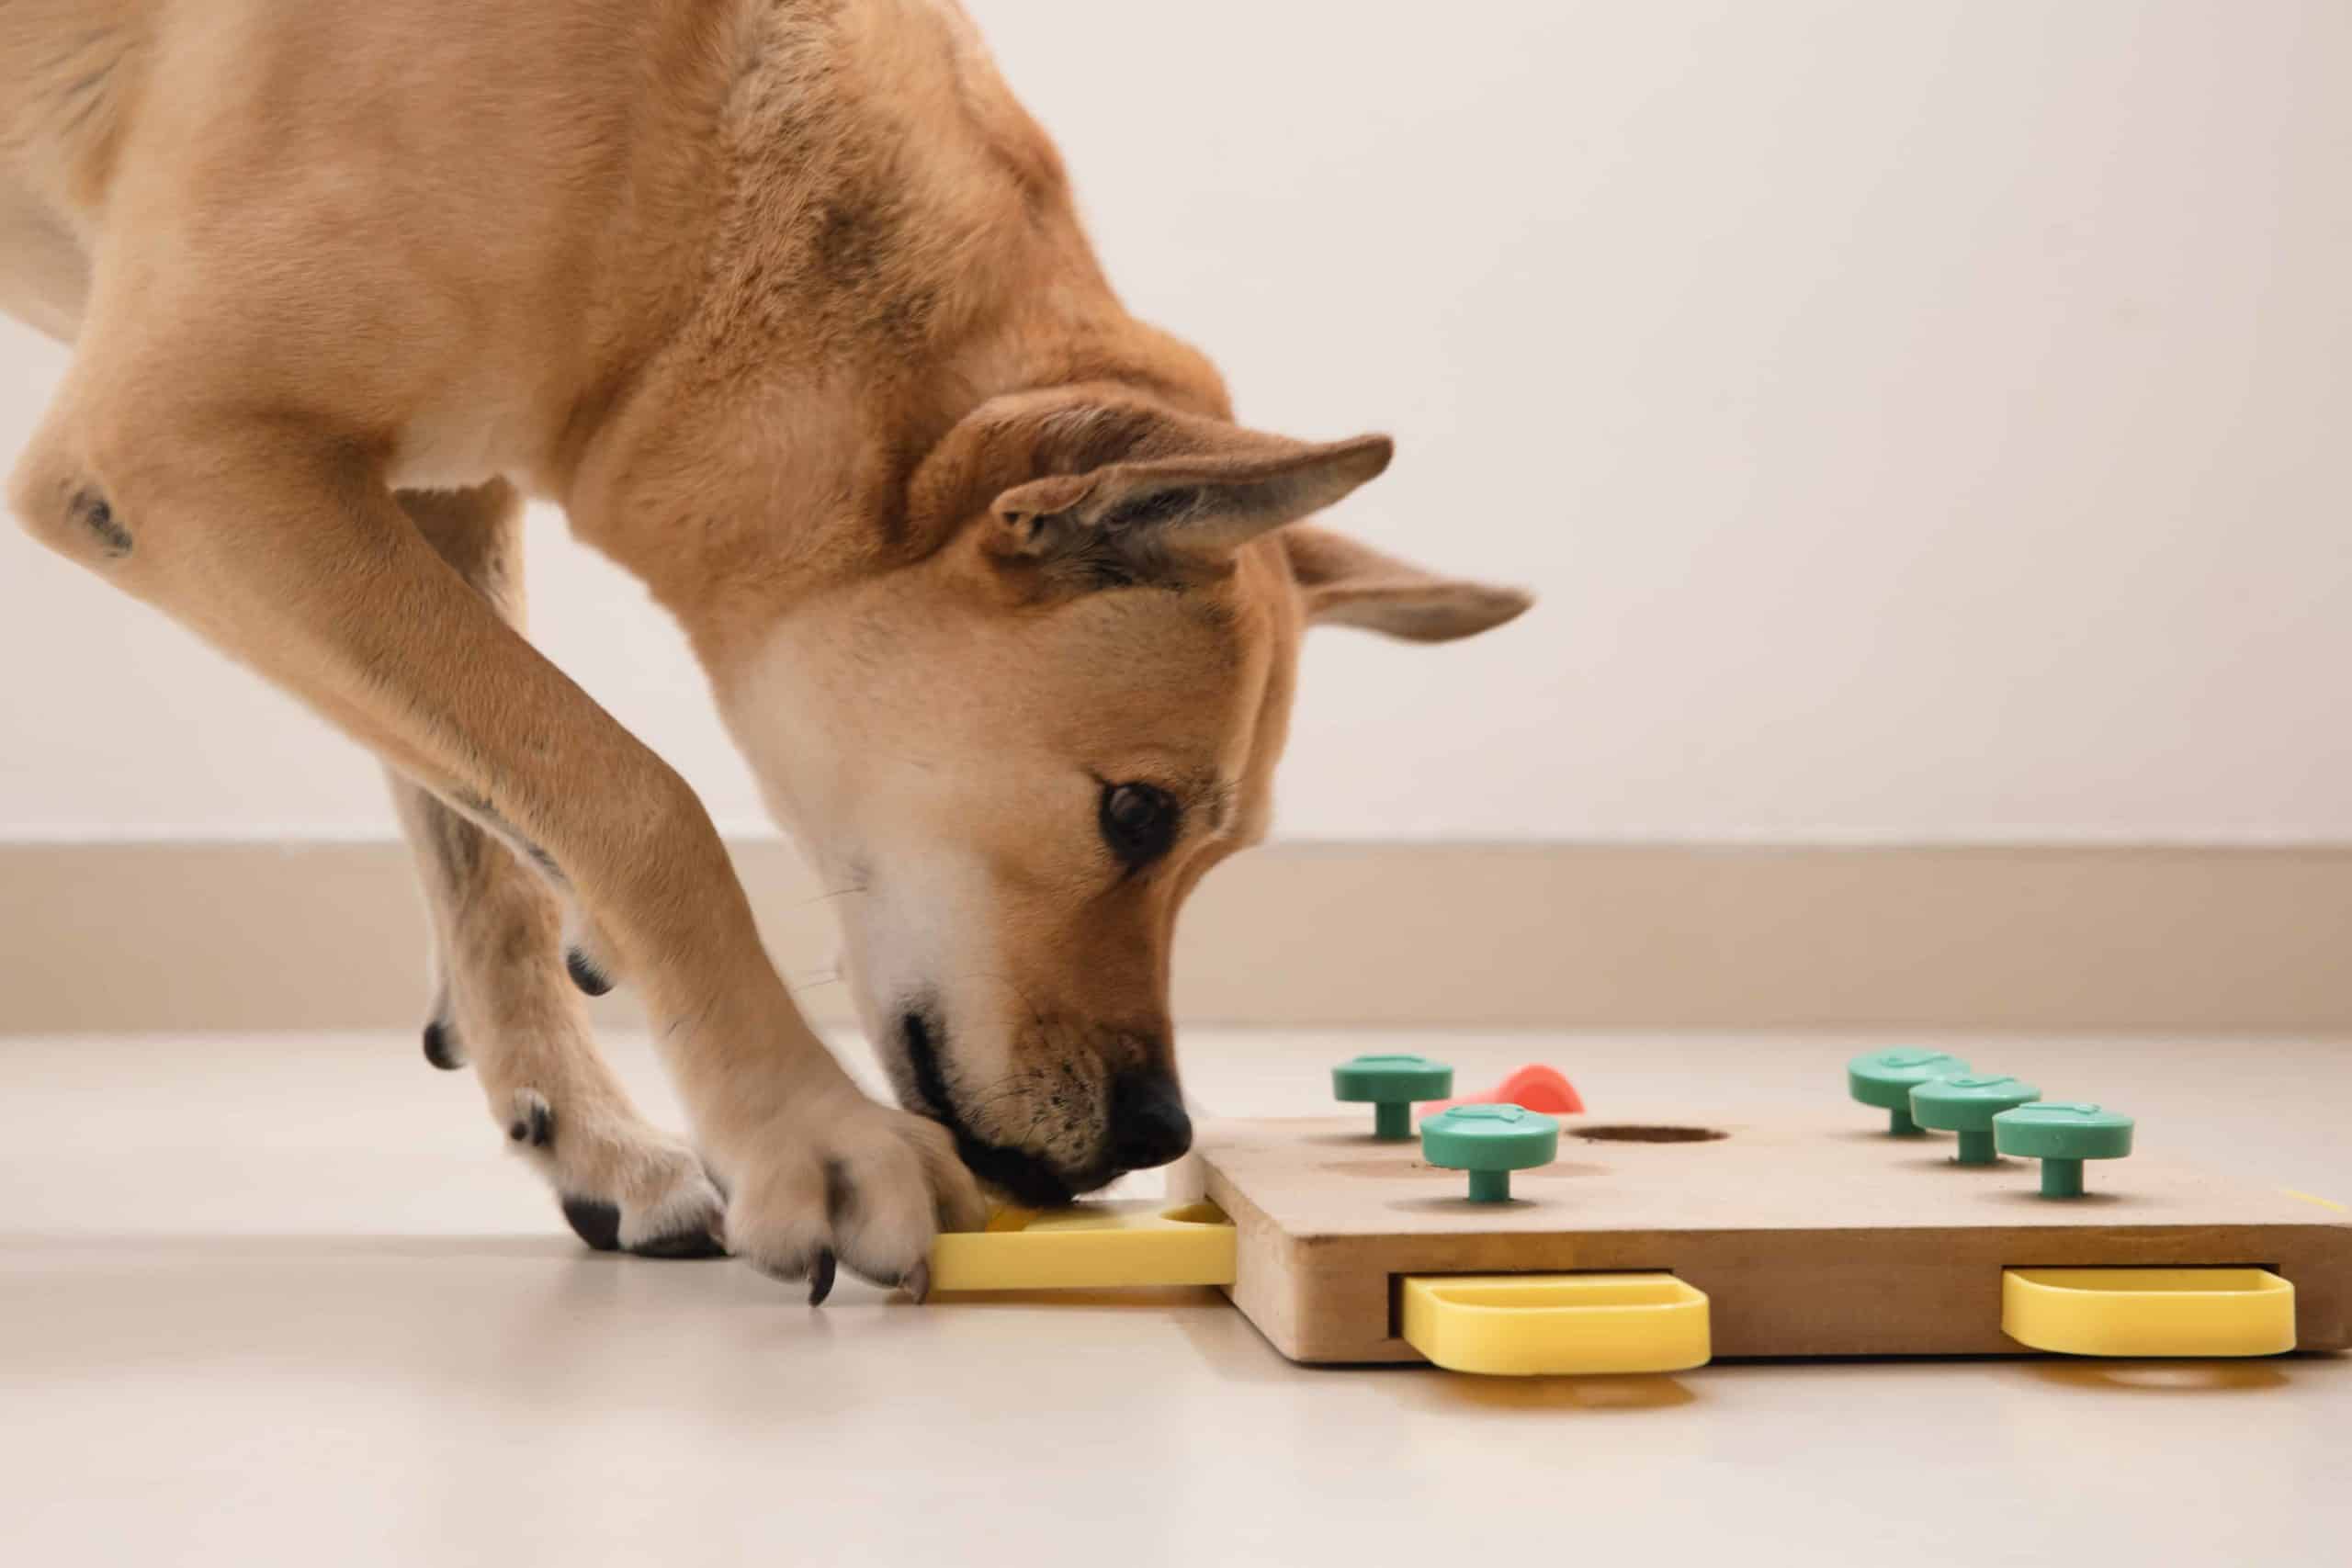 Dog finds treats using a brain training game. Use seven pro tips to create a well-behaved dog: Use treats for training, keep sessions fun, start on day one, try brain training games, and stick to a schedule.